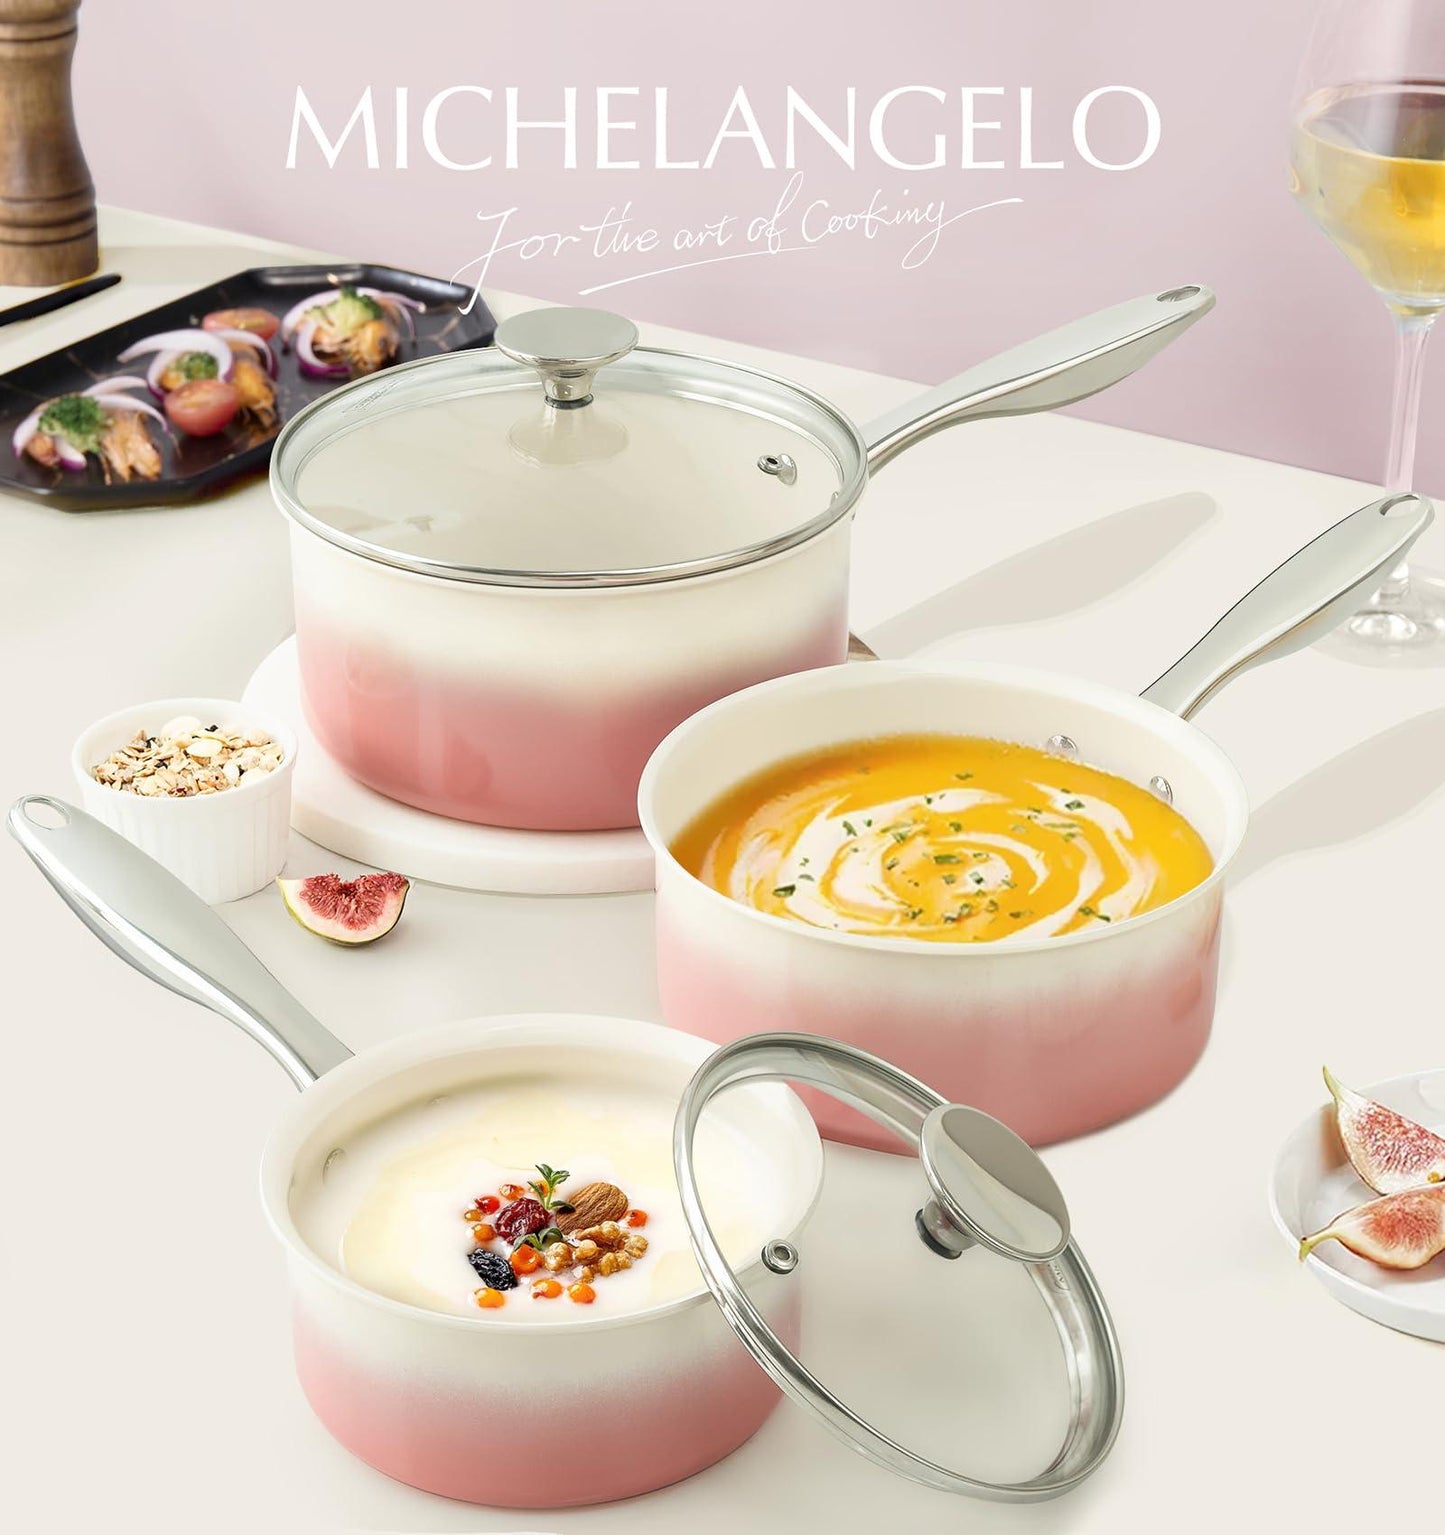 MICHELANGELO Sauce Pan with Lid, Ceramic Saucepan Set, 1Qt & 2Qt & 3Qt Sauce Pan Sets, Nonstick Saucepans with Stainless Steel Handle, Oven Safe, Pink - CookCave